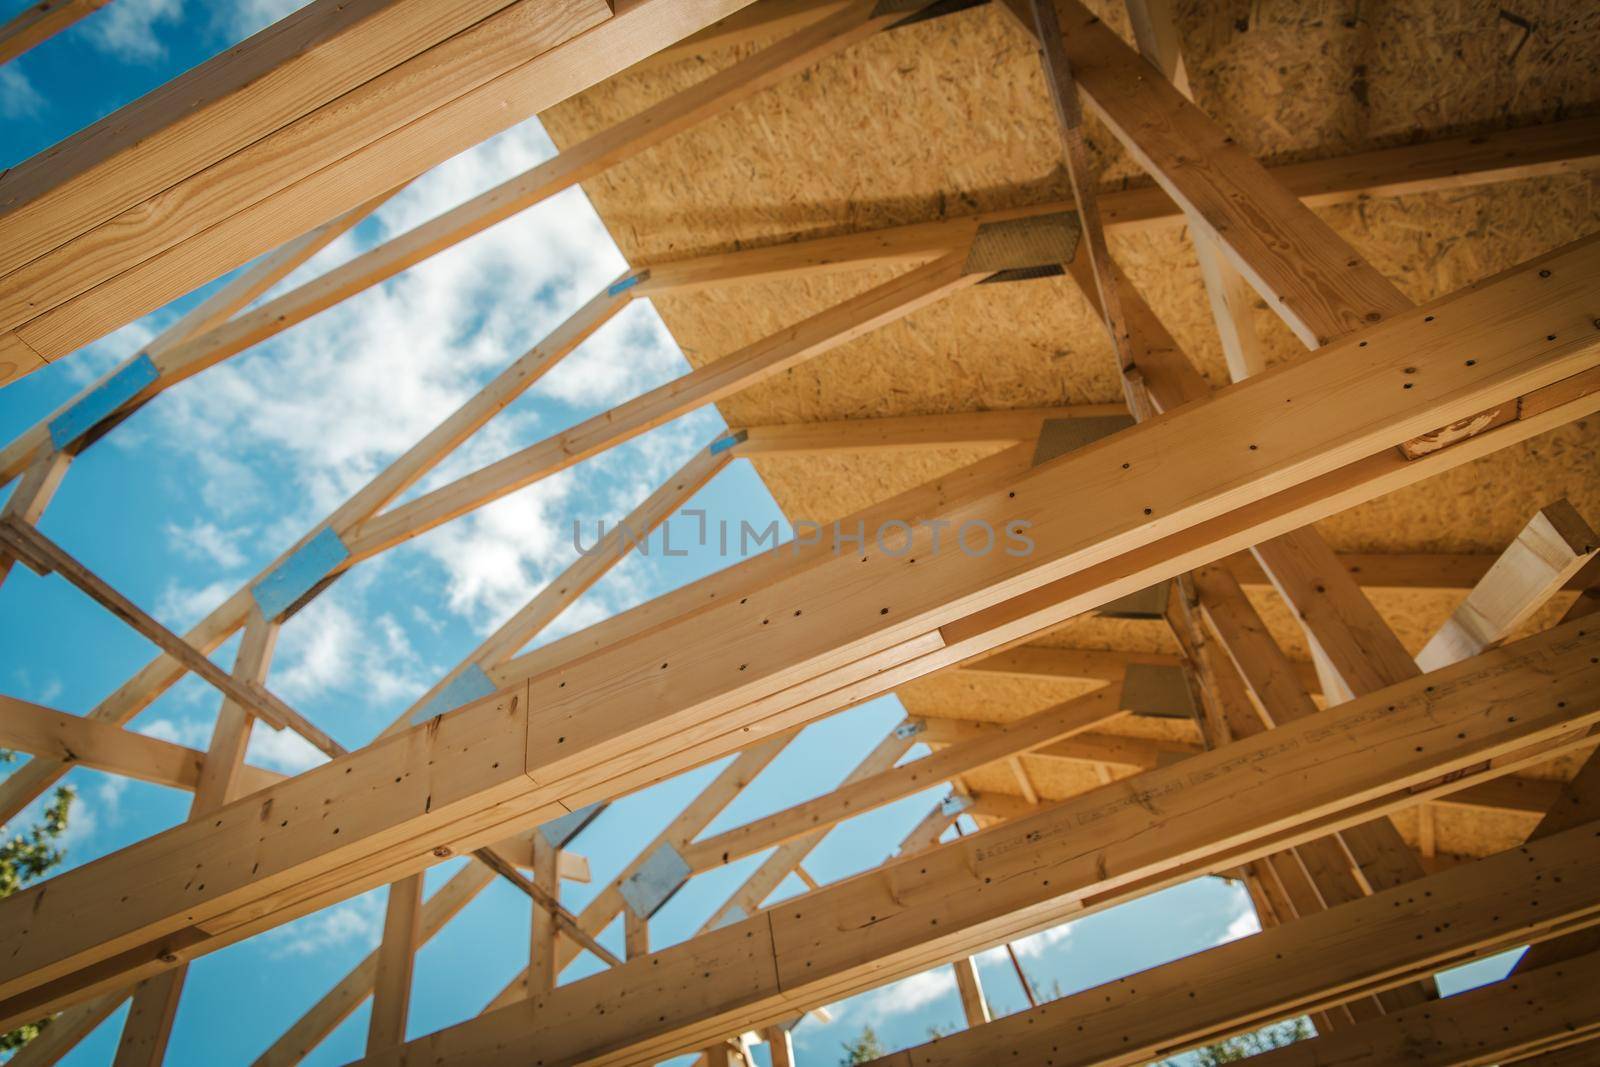 House Building. Covering Wooden Roof Structure with Plywood Boards. Closeup Photo. Construction Industry.